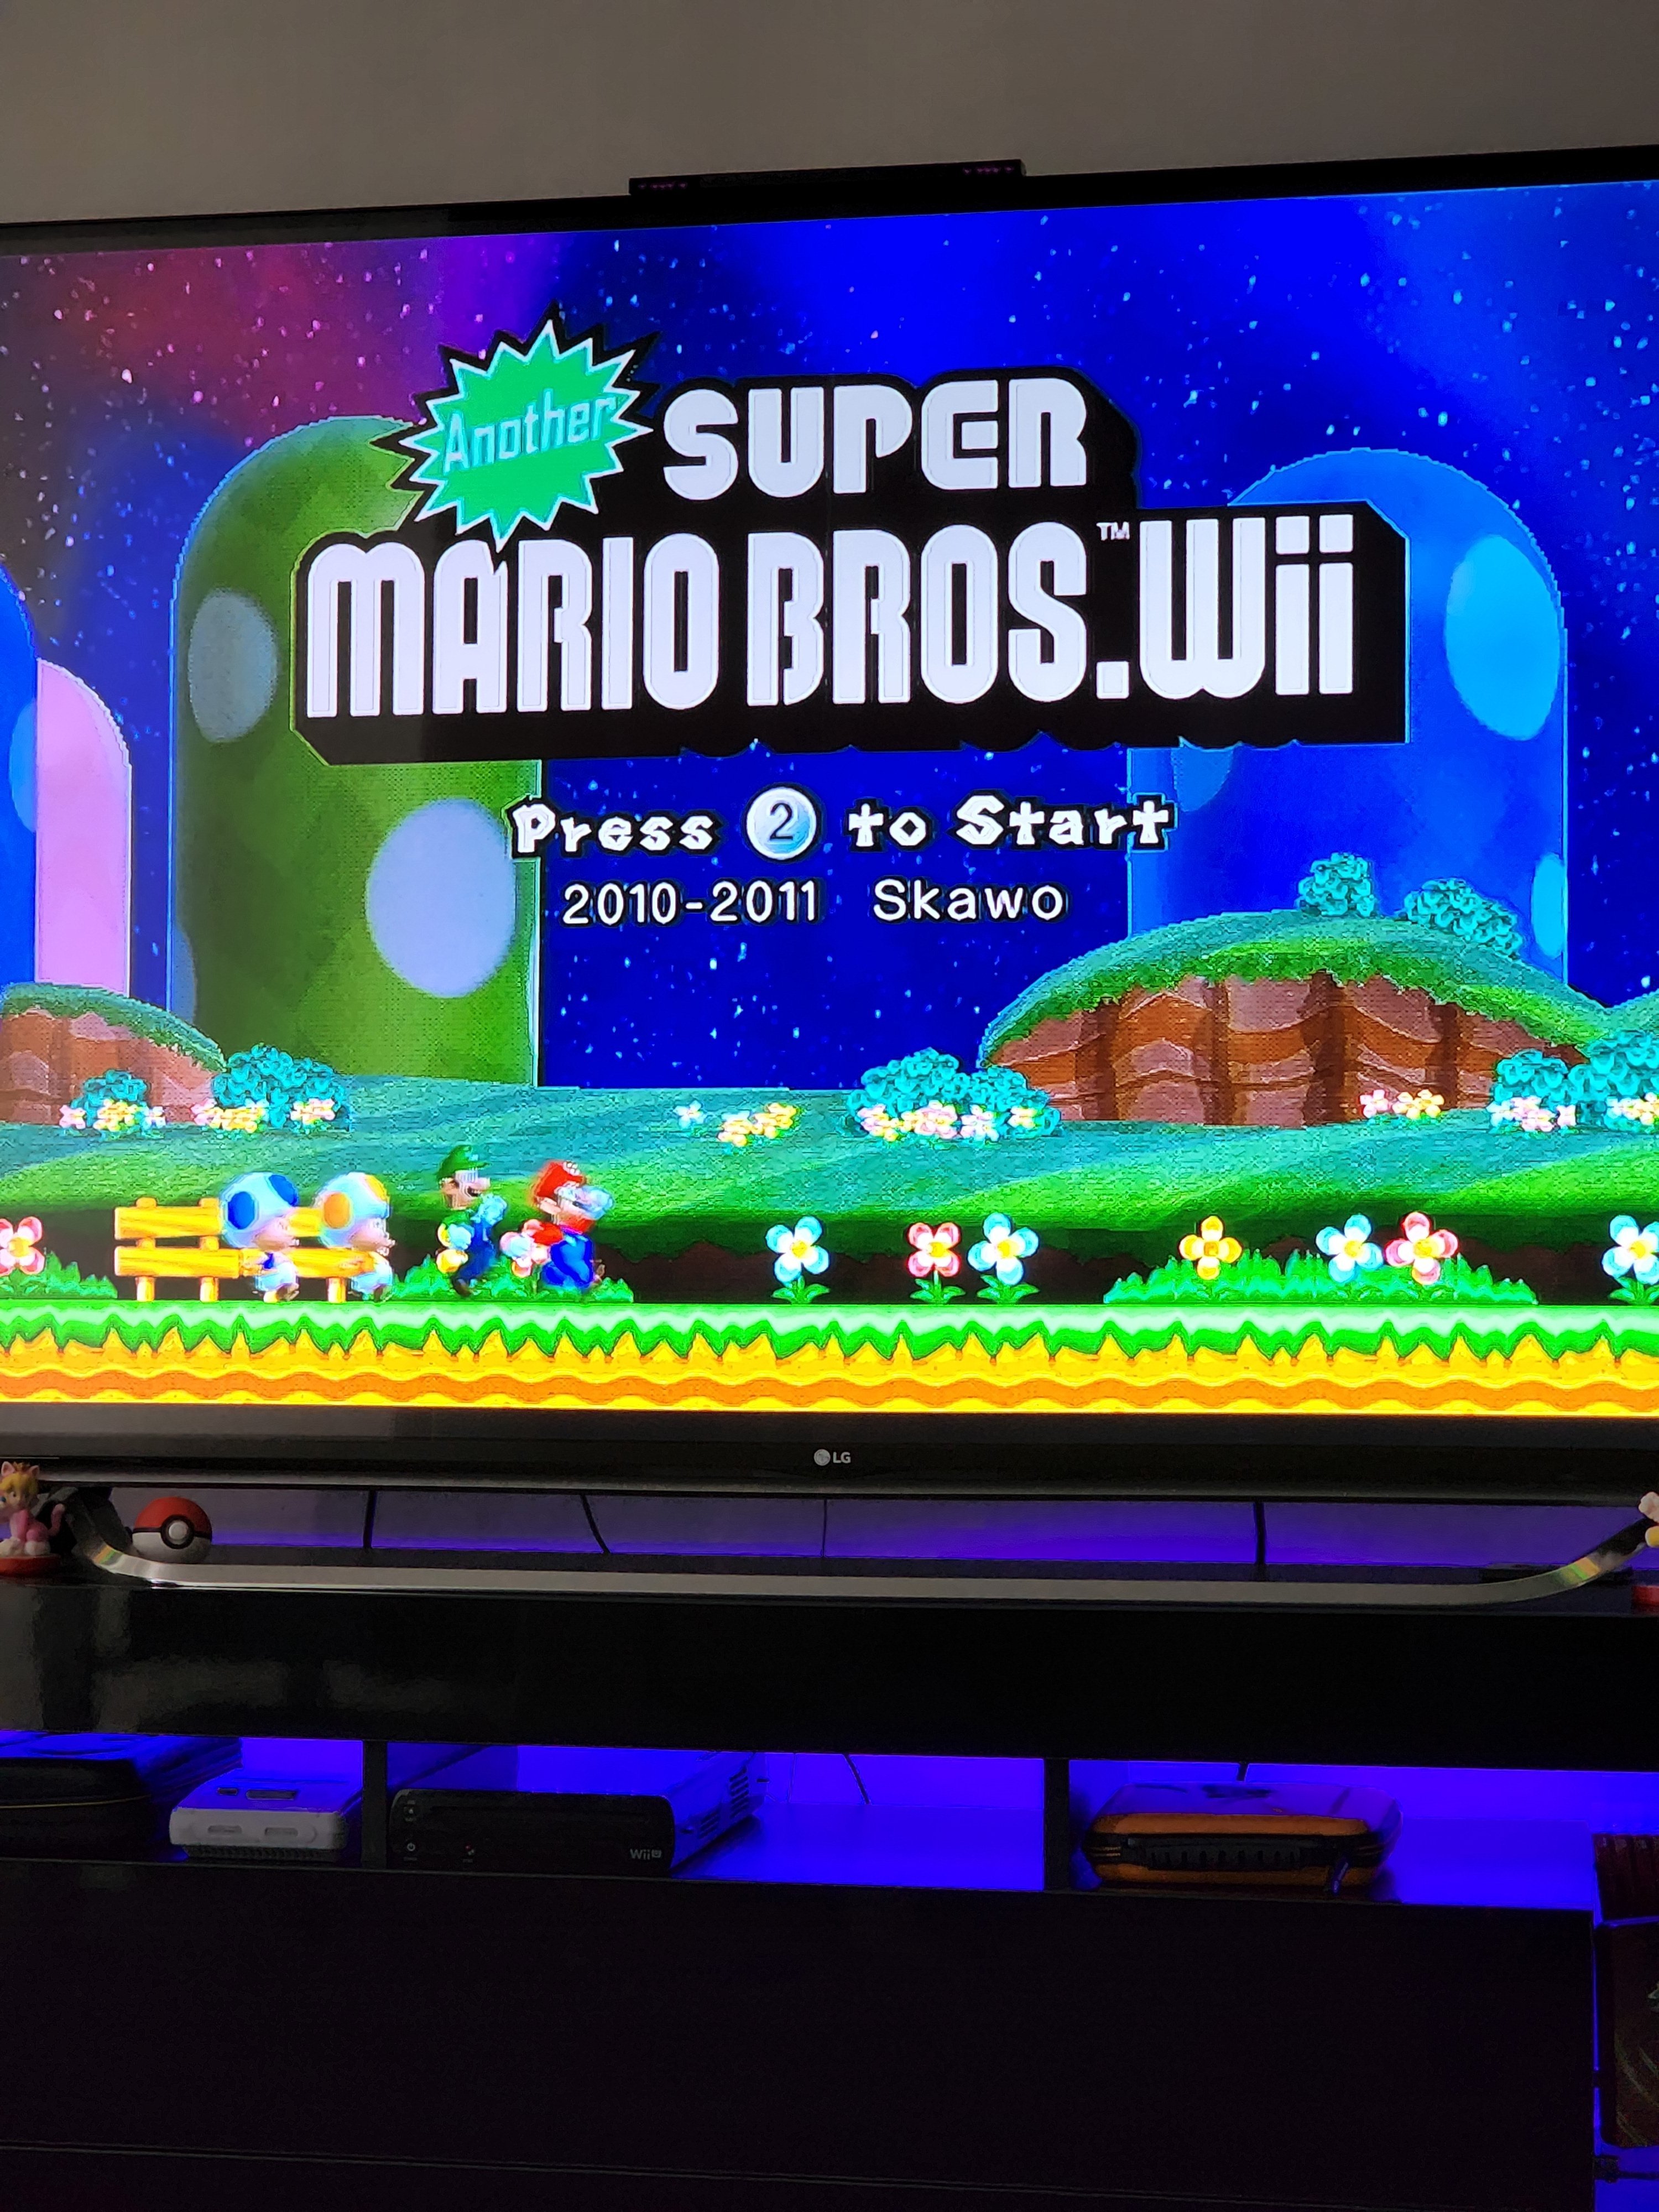 How to Patch & Run a Modded Super Mario Bros. Wii on the Wii U |  GBAtemp.net - The Independent Video Game Community